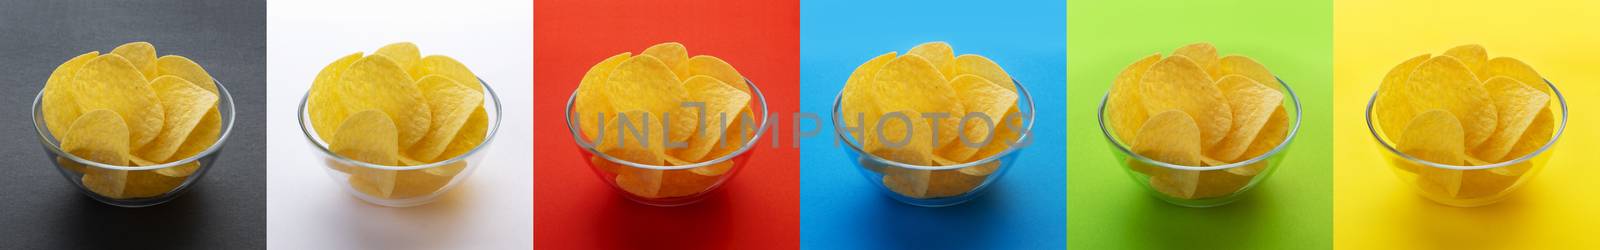 Potato chips in bowl isolated on different color backgrounds, collection